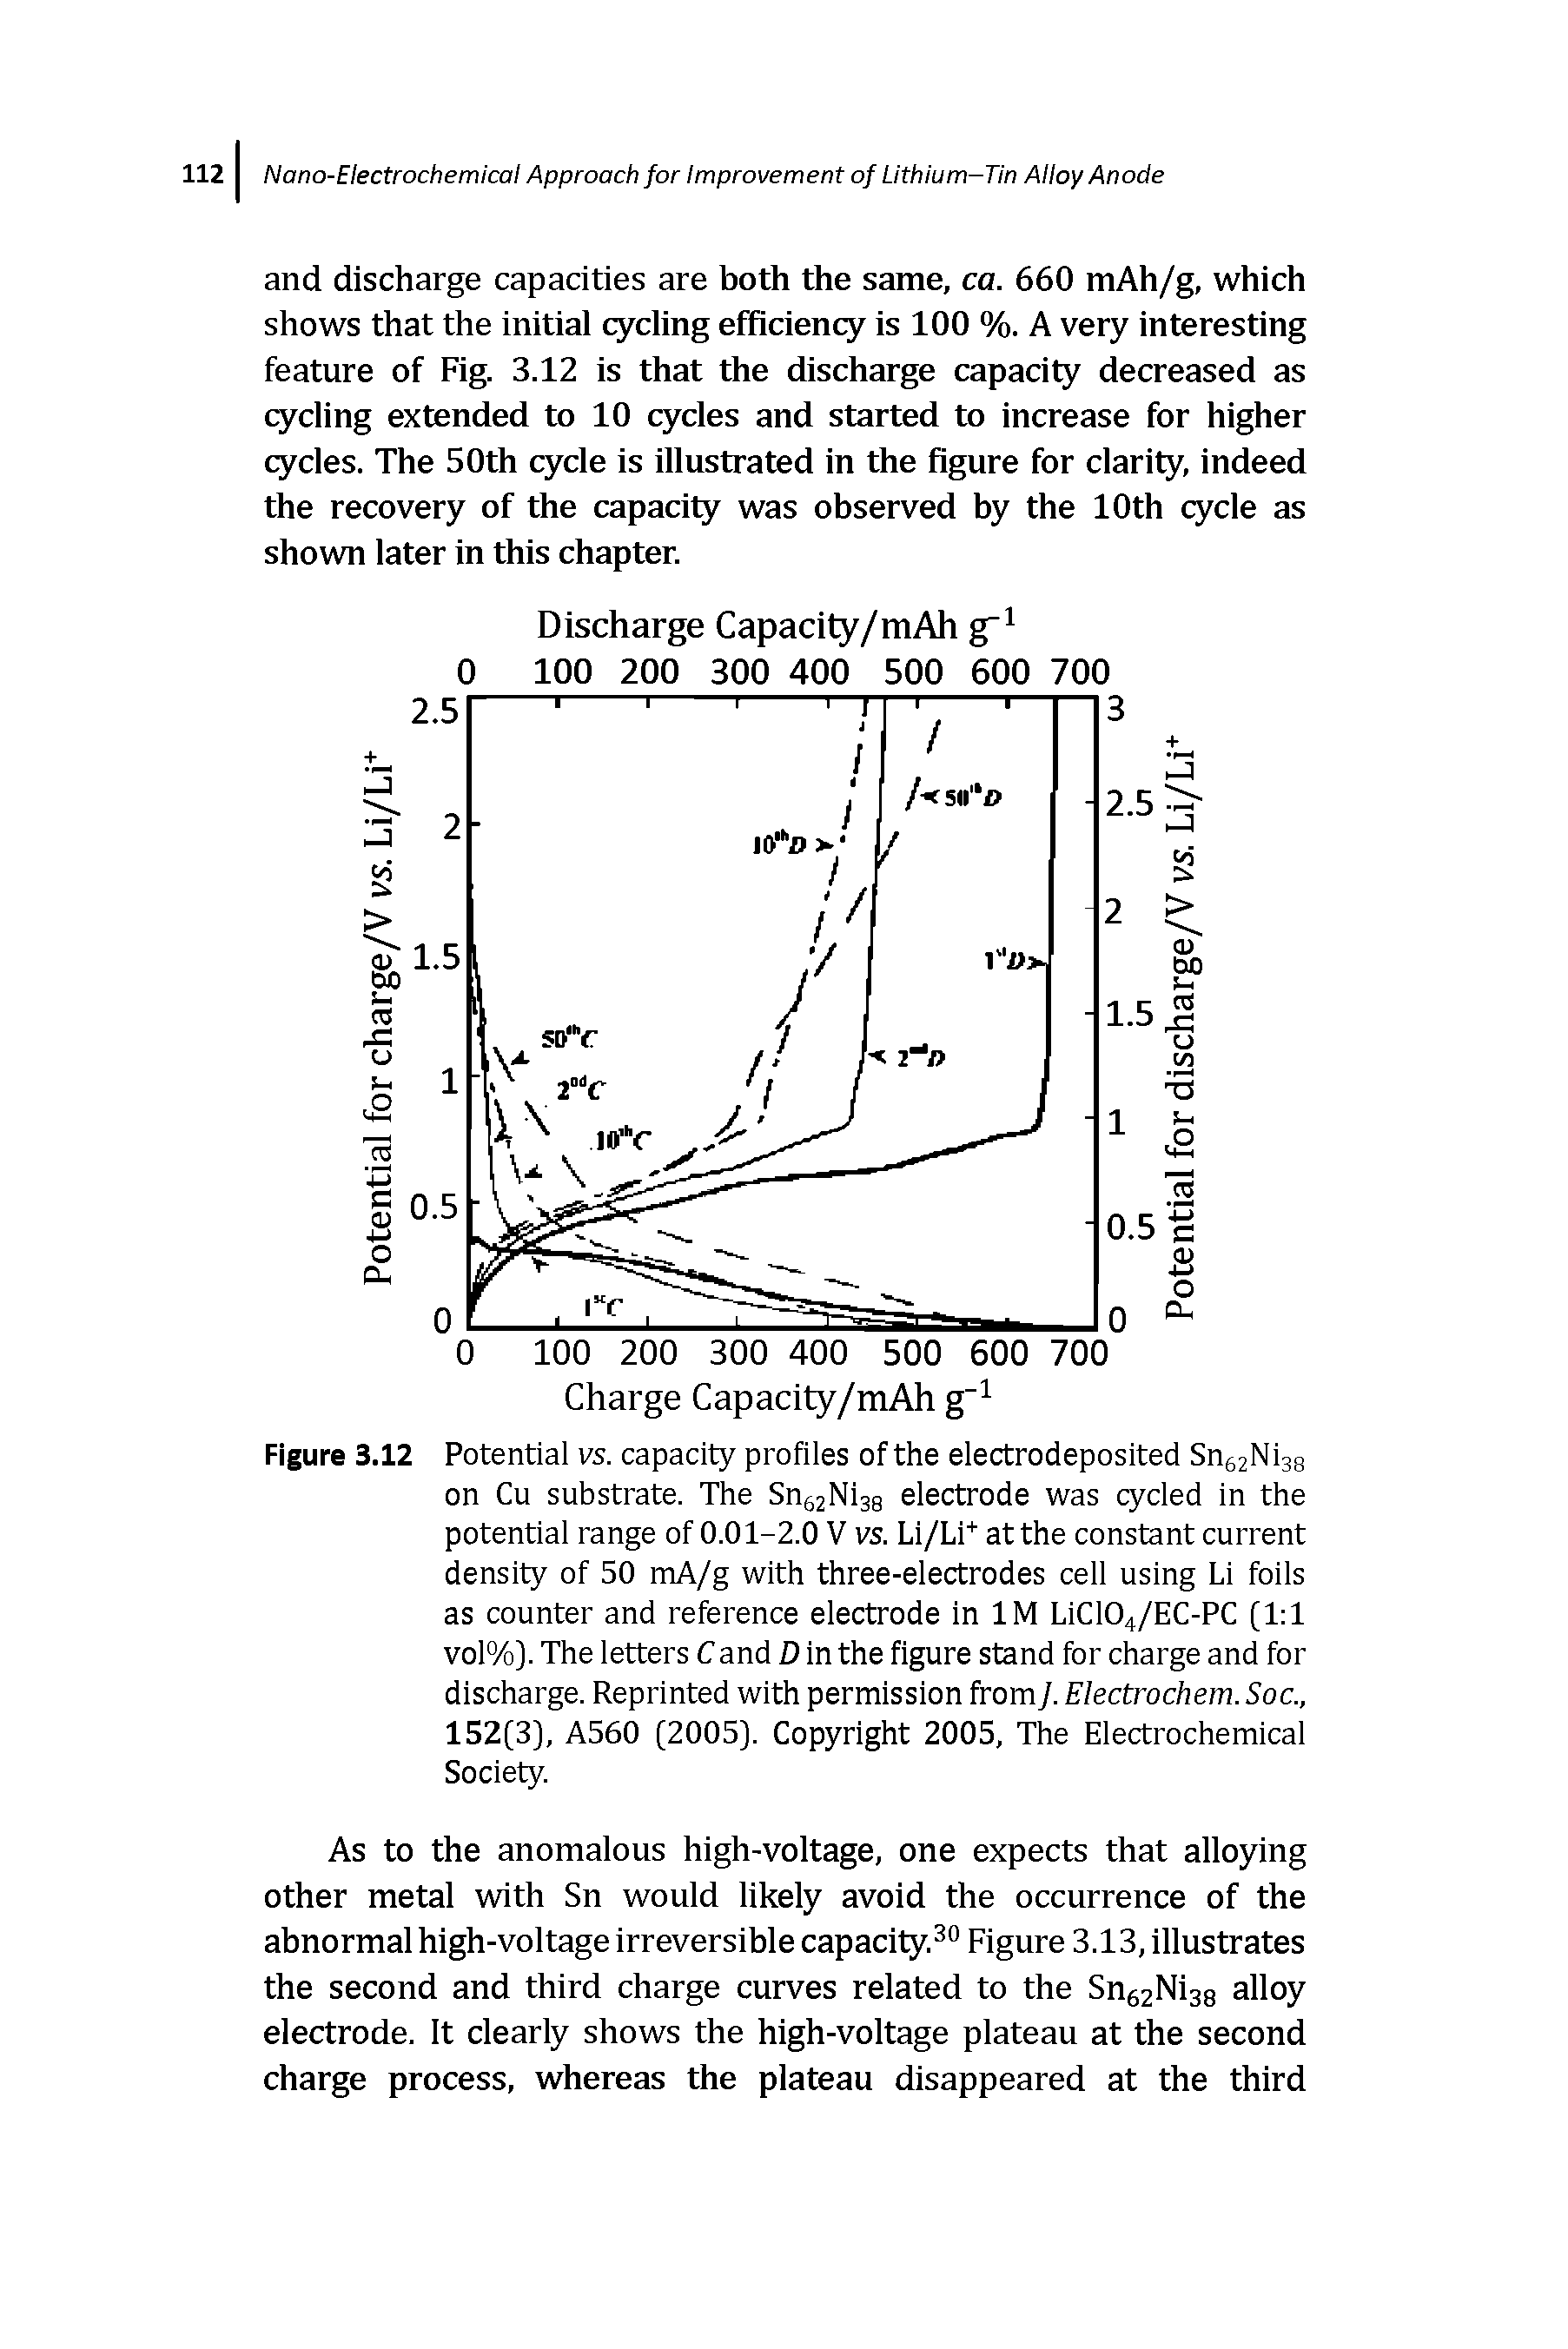 Figure 3.12 Potential vs. capacity profiles of the electrodeposited SngjNigg on Cu substrate. The Sn52Ni3a electrode was cycled in the potential range of 0.01-2.0 V vs. Li/Li at the constant current density of 50 mA/g with three-electrodes cell using Li foils as counter and reference electrode In IM LiC104/EC-PC [1 1 vol%]. The letters Cand D In the figure stand for charge and for discharge. Reprinted with permission fromJ. Electrochem. Soc., 152[3], A560 [2005]. Copyright 2005, The Electrochemical Society.